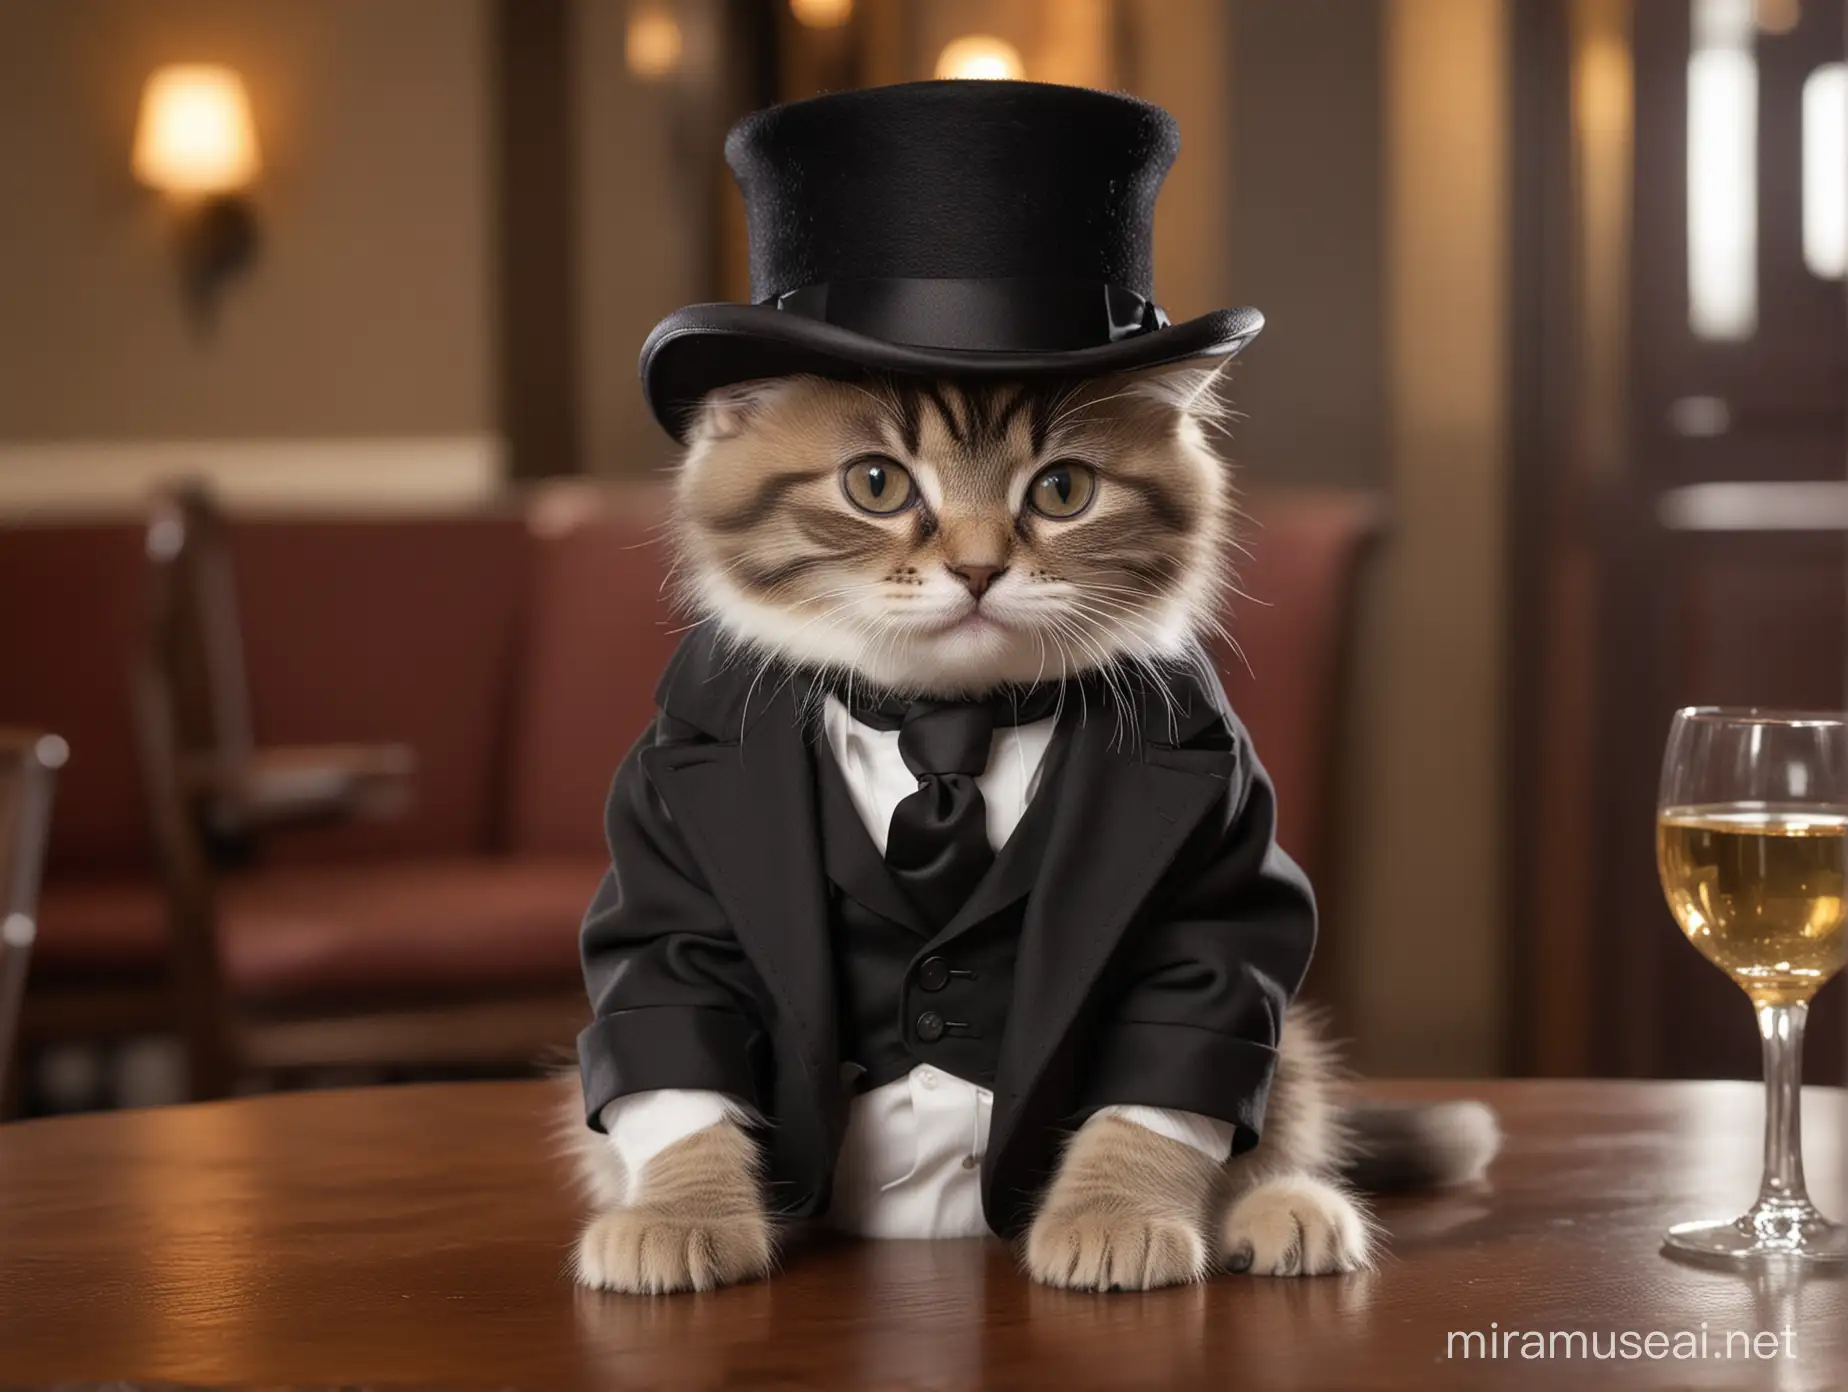 kitten wearing a top hat and suit, sitting in a fancy steakhouse